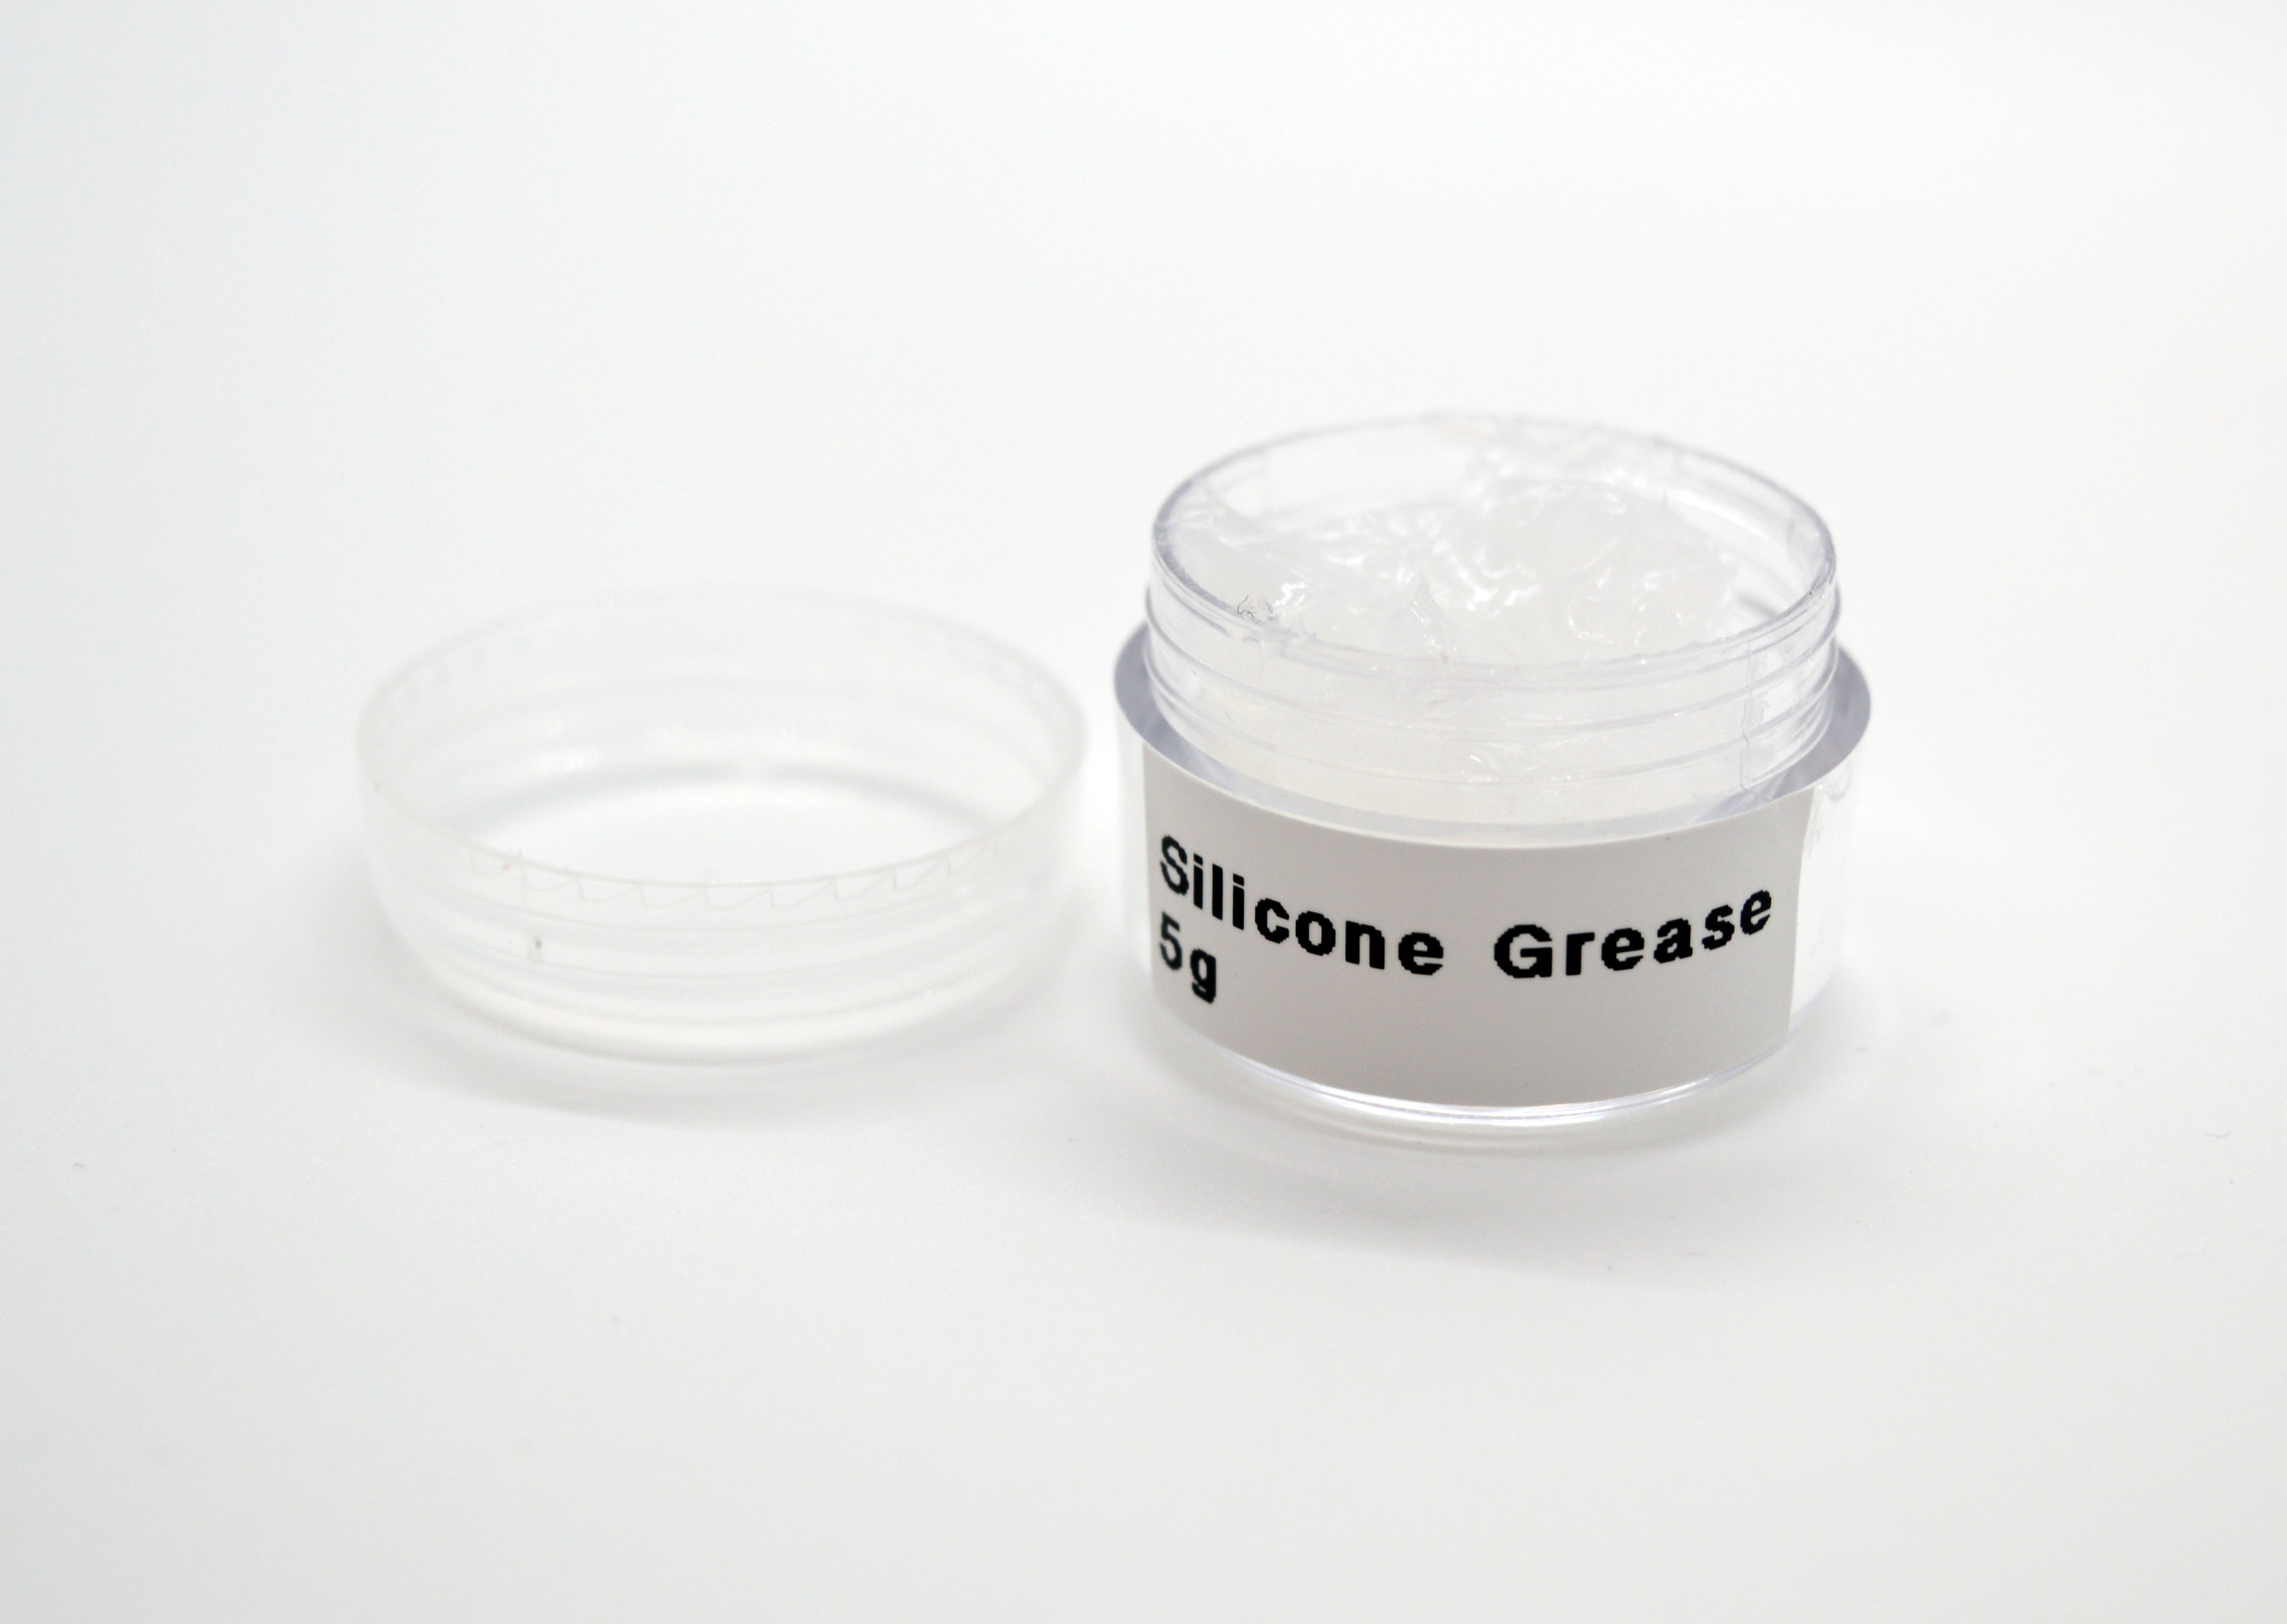 Save a Dive Kit - Silicone Grease